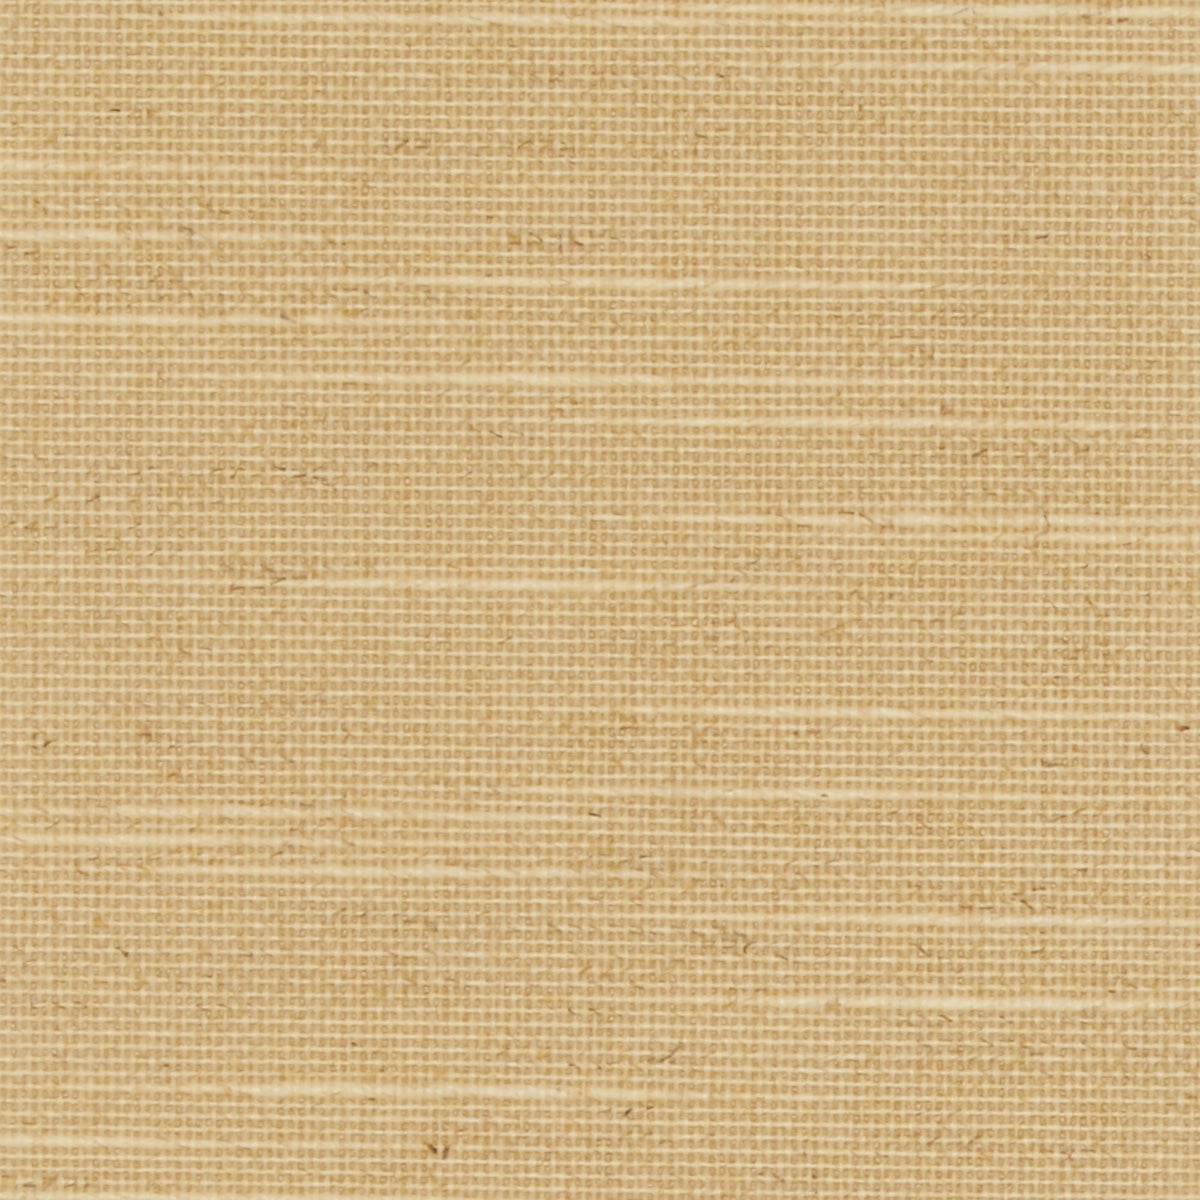 Linenweave Hessian Vertical Replacement Blind Slat